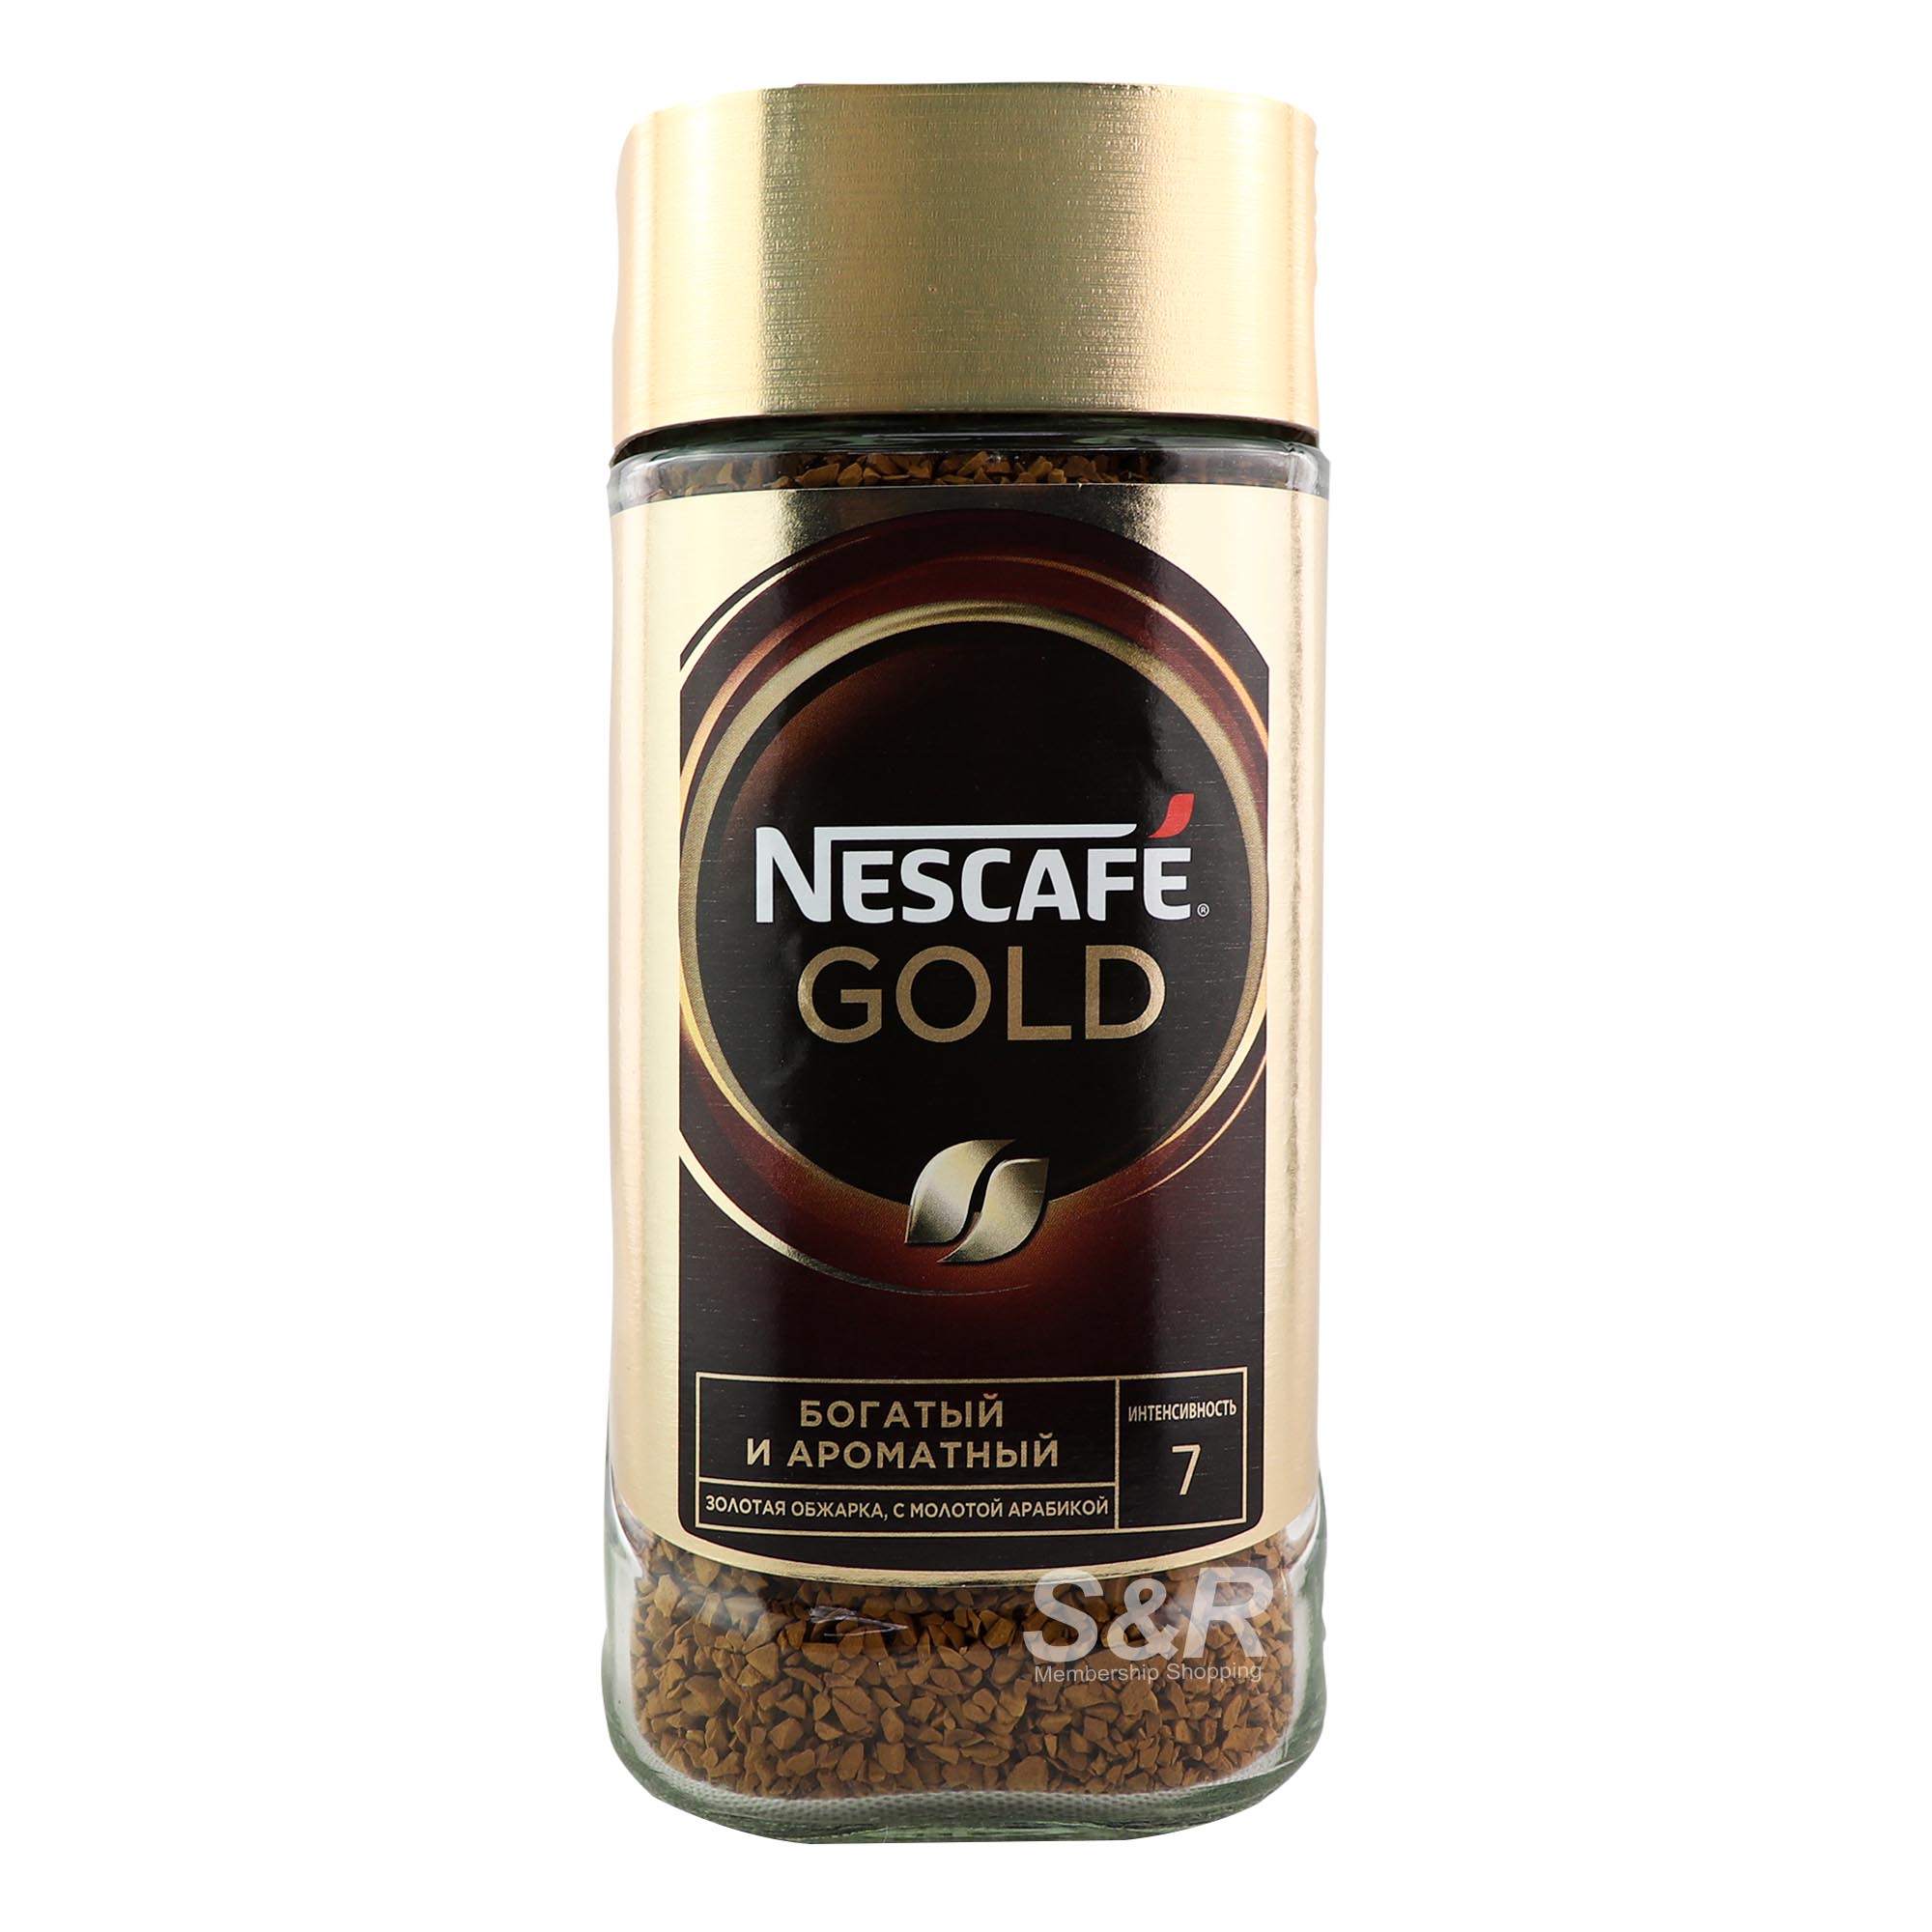 Nescafe Gold Instant Coffee 190g